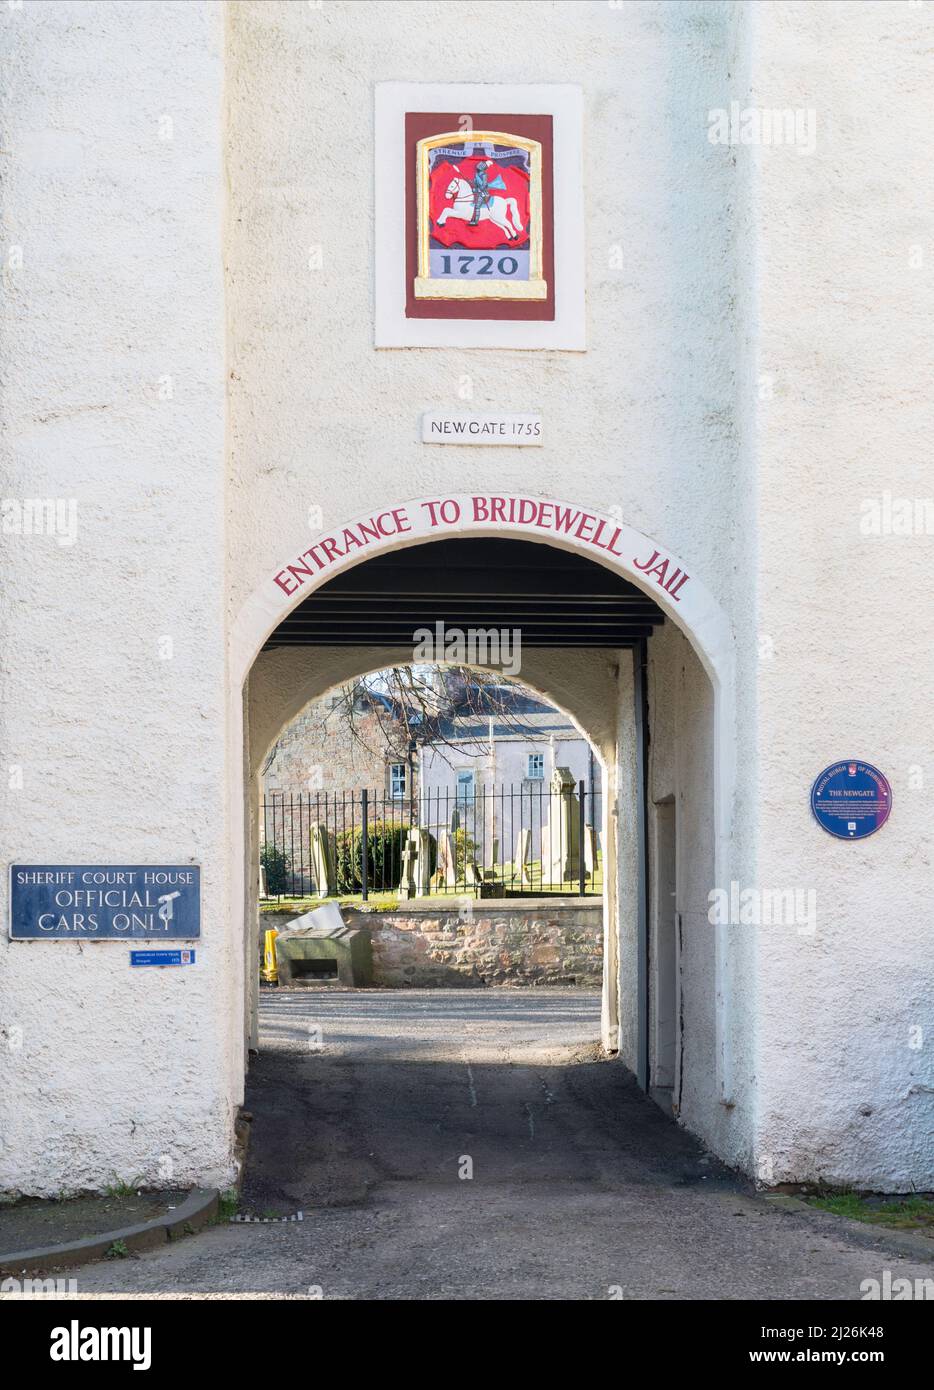 Newgate, the entrance to Bridewell Jail and the Sheriff Court House in Jedburgh, Scottish Borders, Scotland, UK Stock Photo